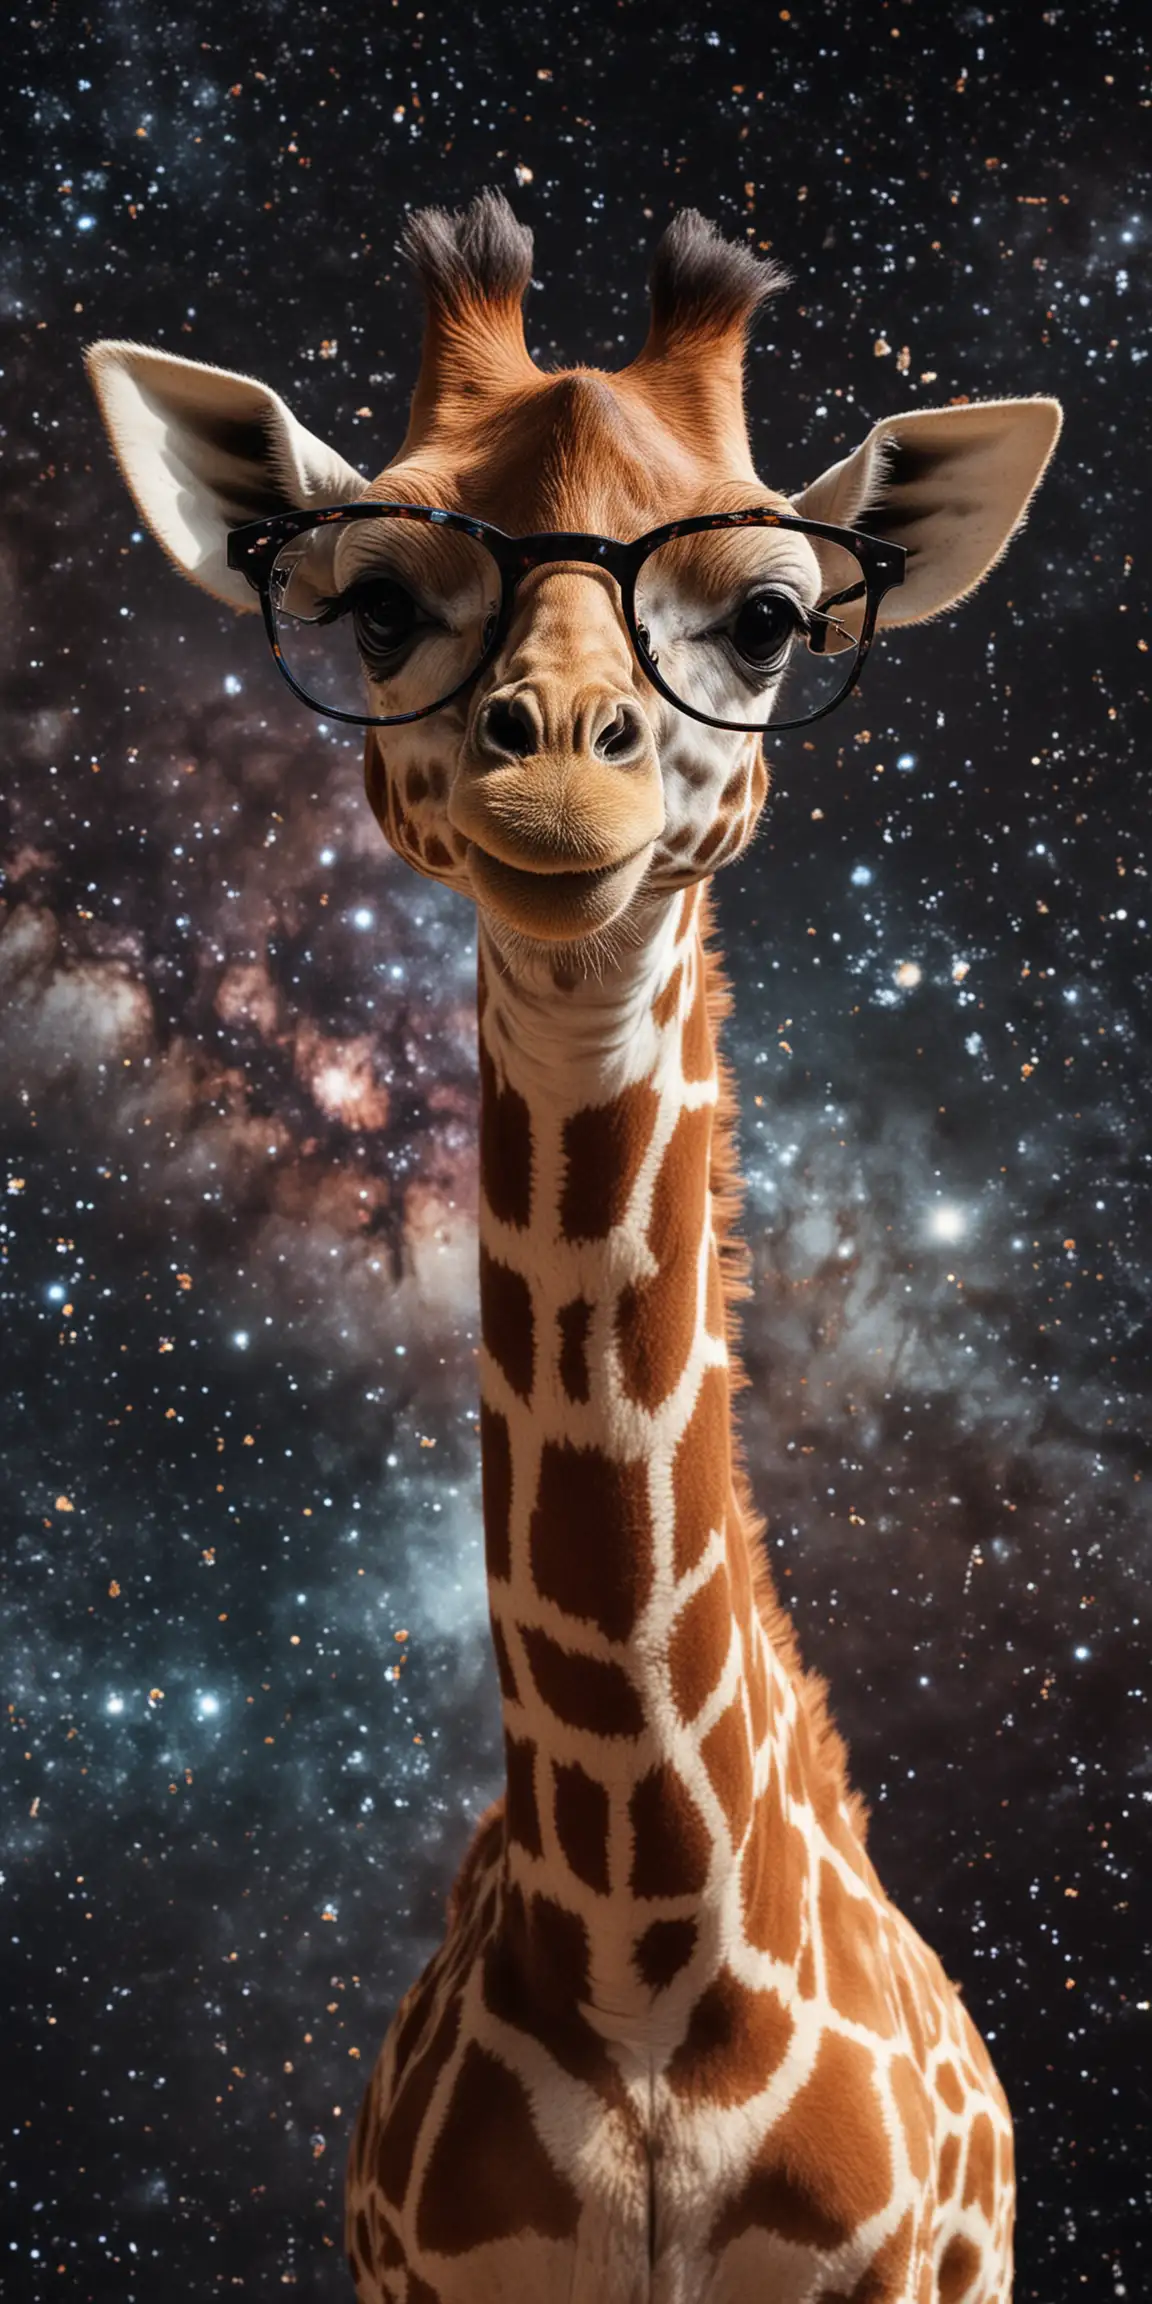 Baby Giraffe with Glasses in Space Adventure